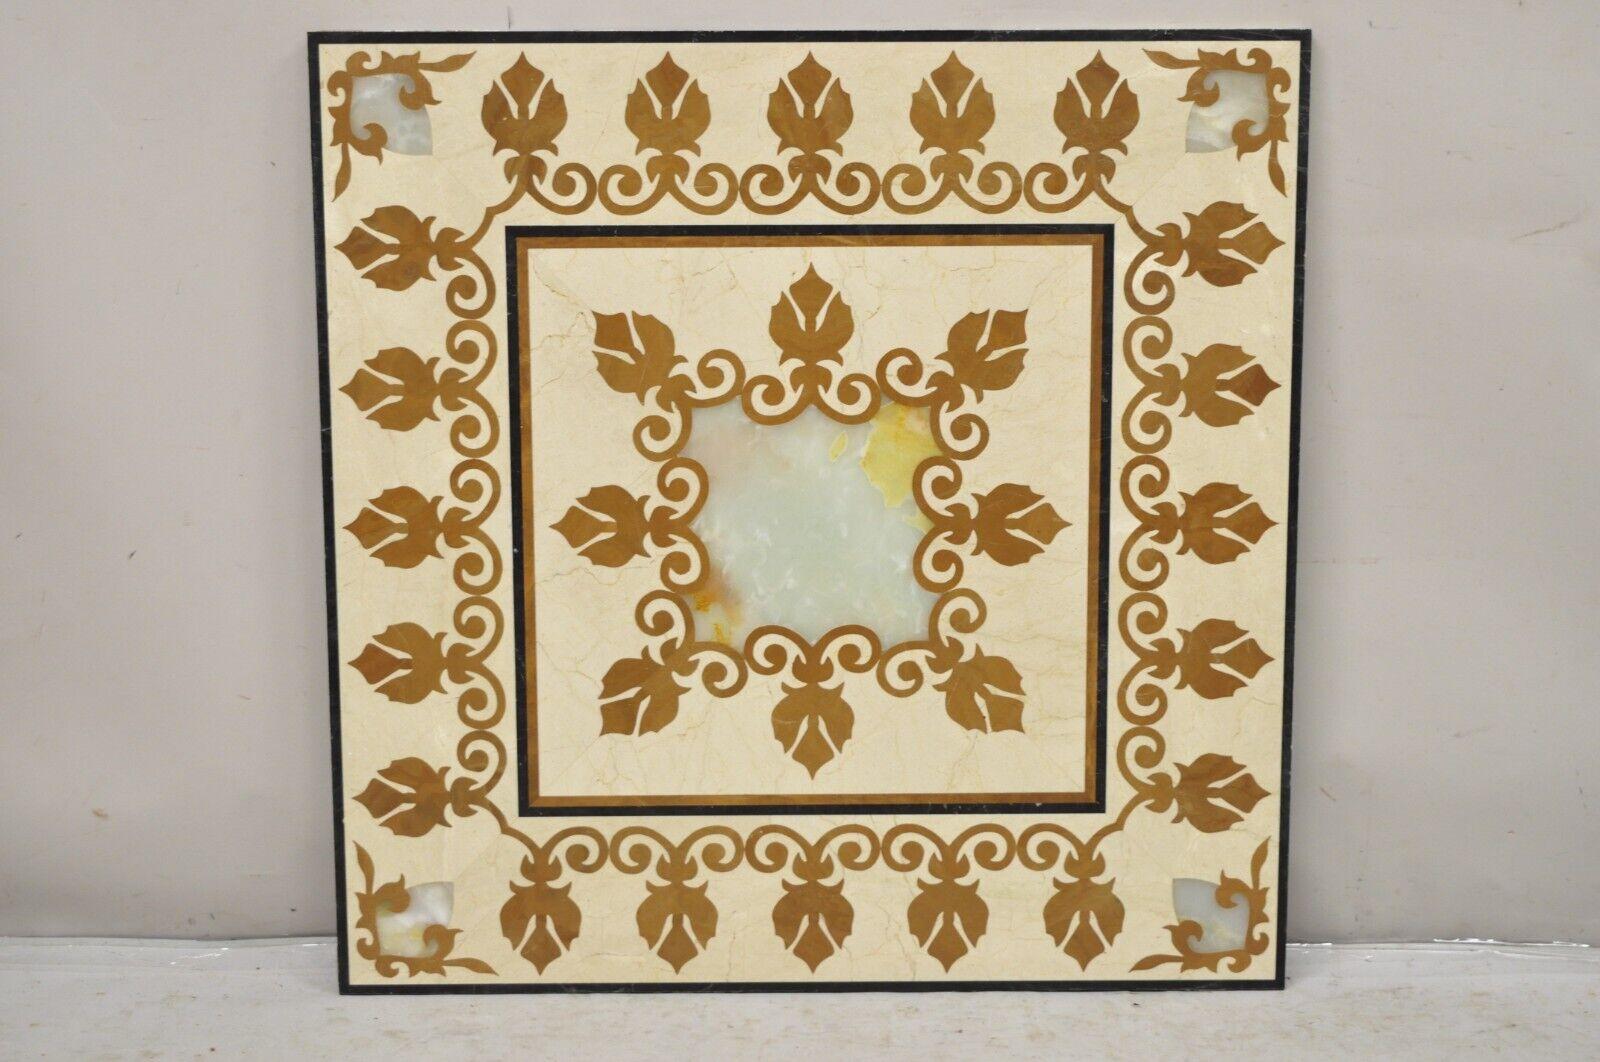 Large 36 x 36 Mediterranean Venetian Style Decorative Centerpiece Accent Floor Tile with Onyx Inlay. Circa Late 20th - 21st Century
Measurements: 36